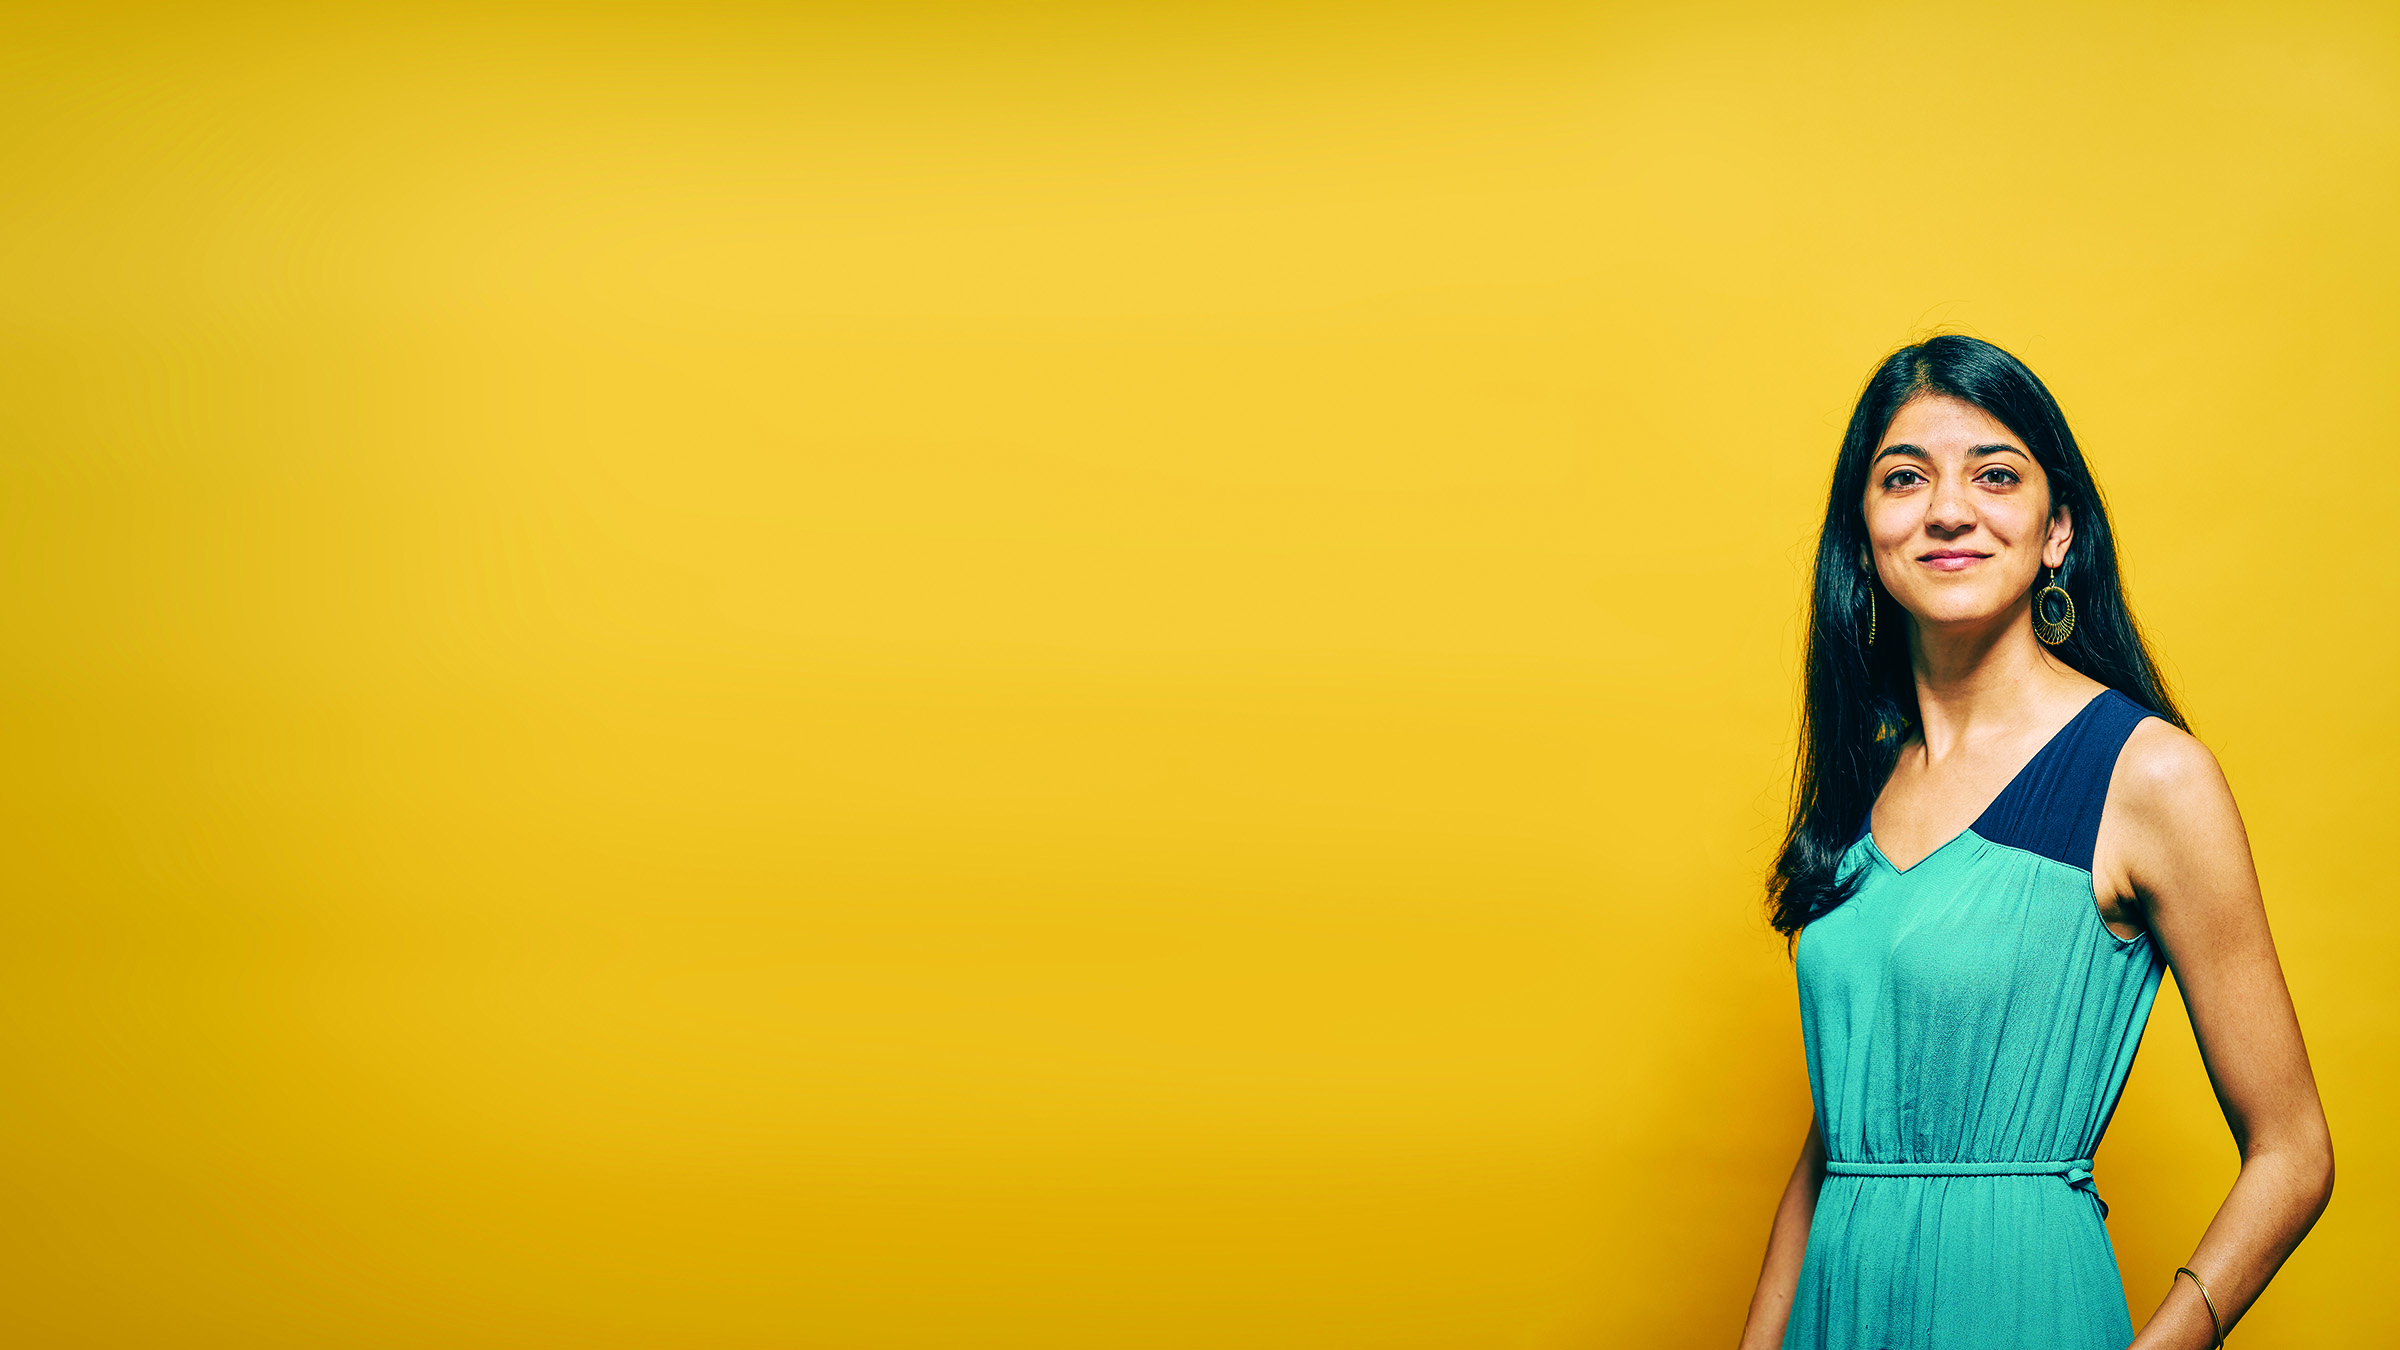 Portrait of a woman in blue dress in front of a yellow background